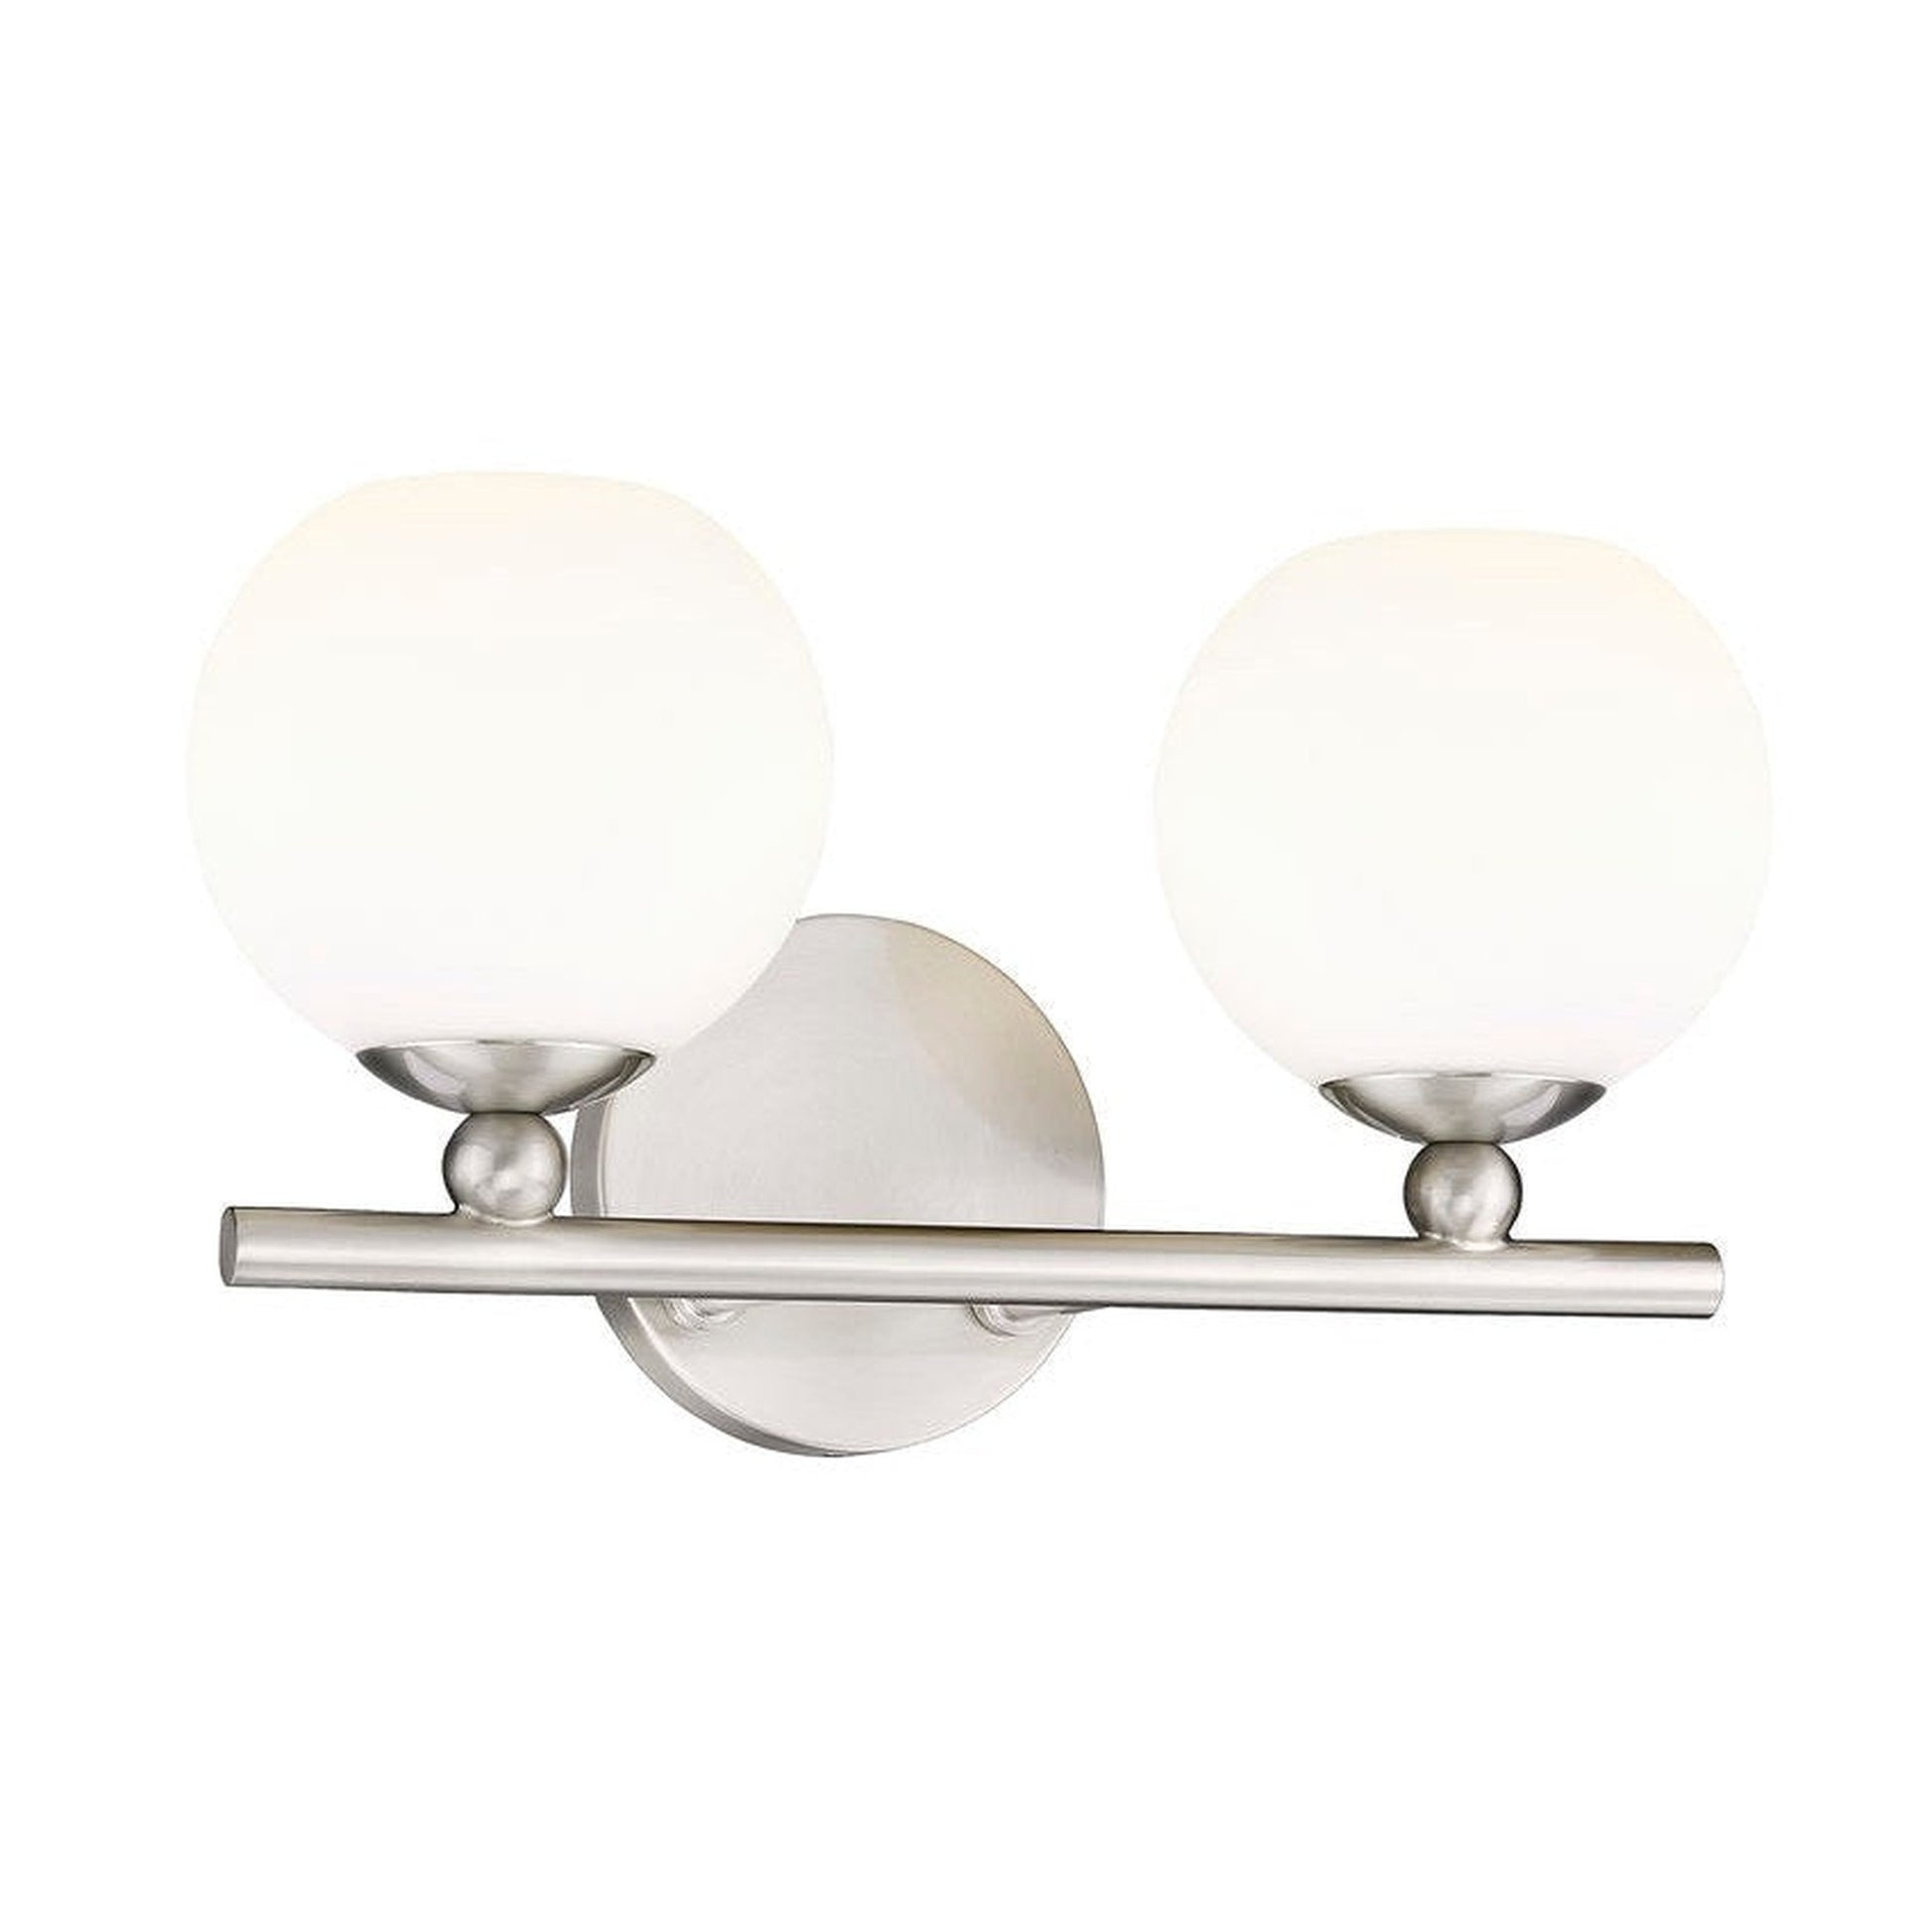 Z-Lite Neoma 14" 2-Light Brushed Nickel and Opal Etched Glass Shade Vanity Light